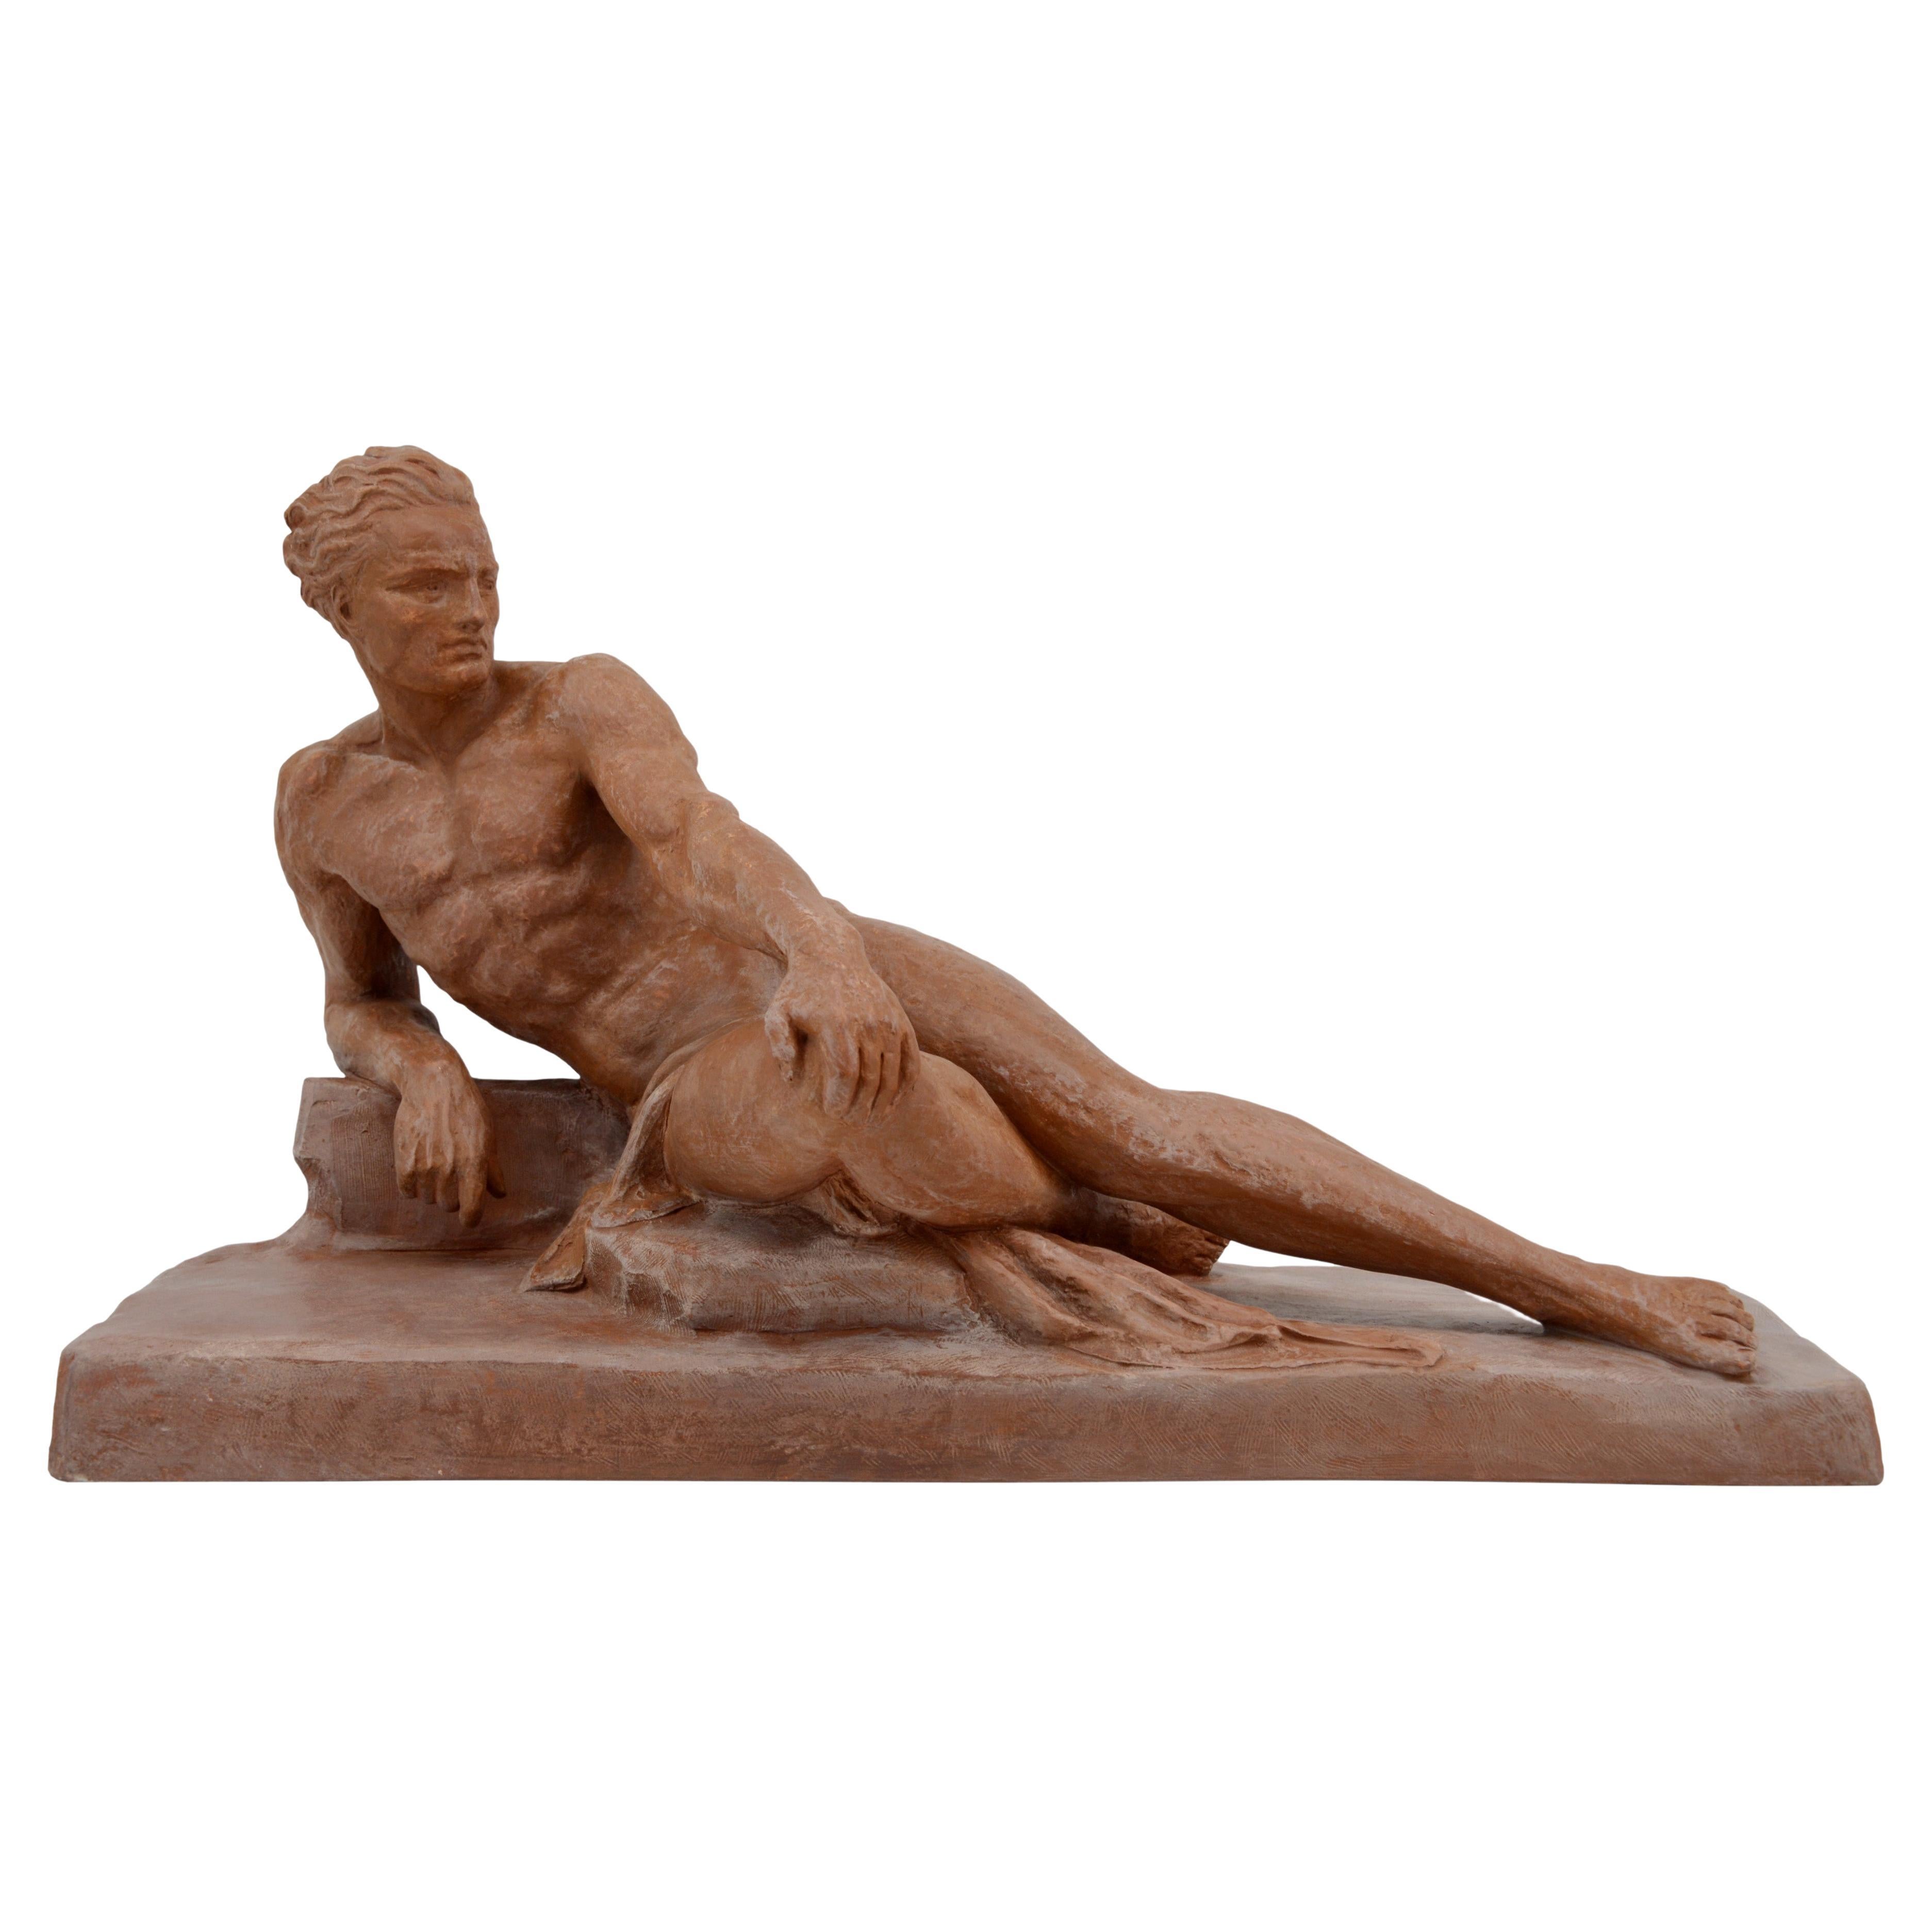 Ugo Cipriani French Large Art Deco Terracotta Sculpture, 1930s